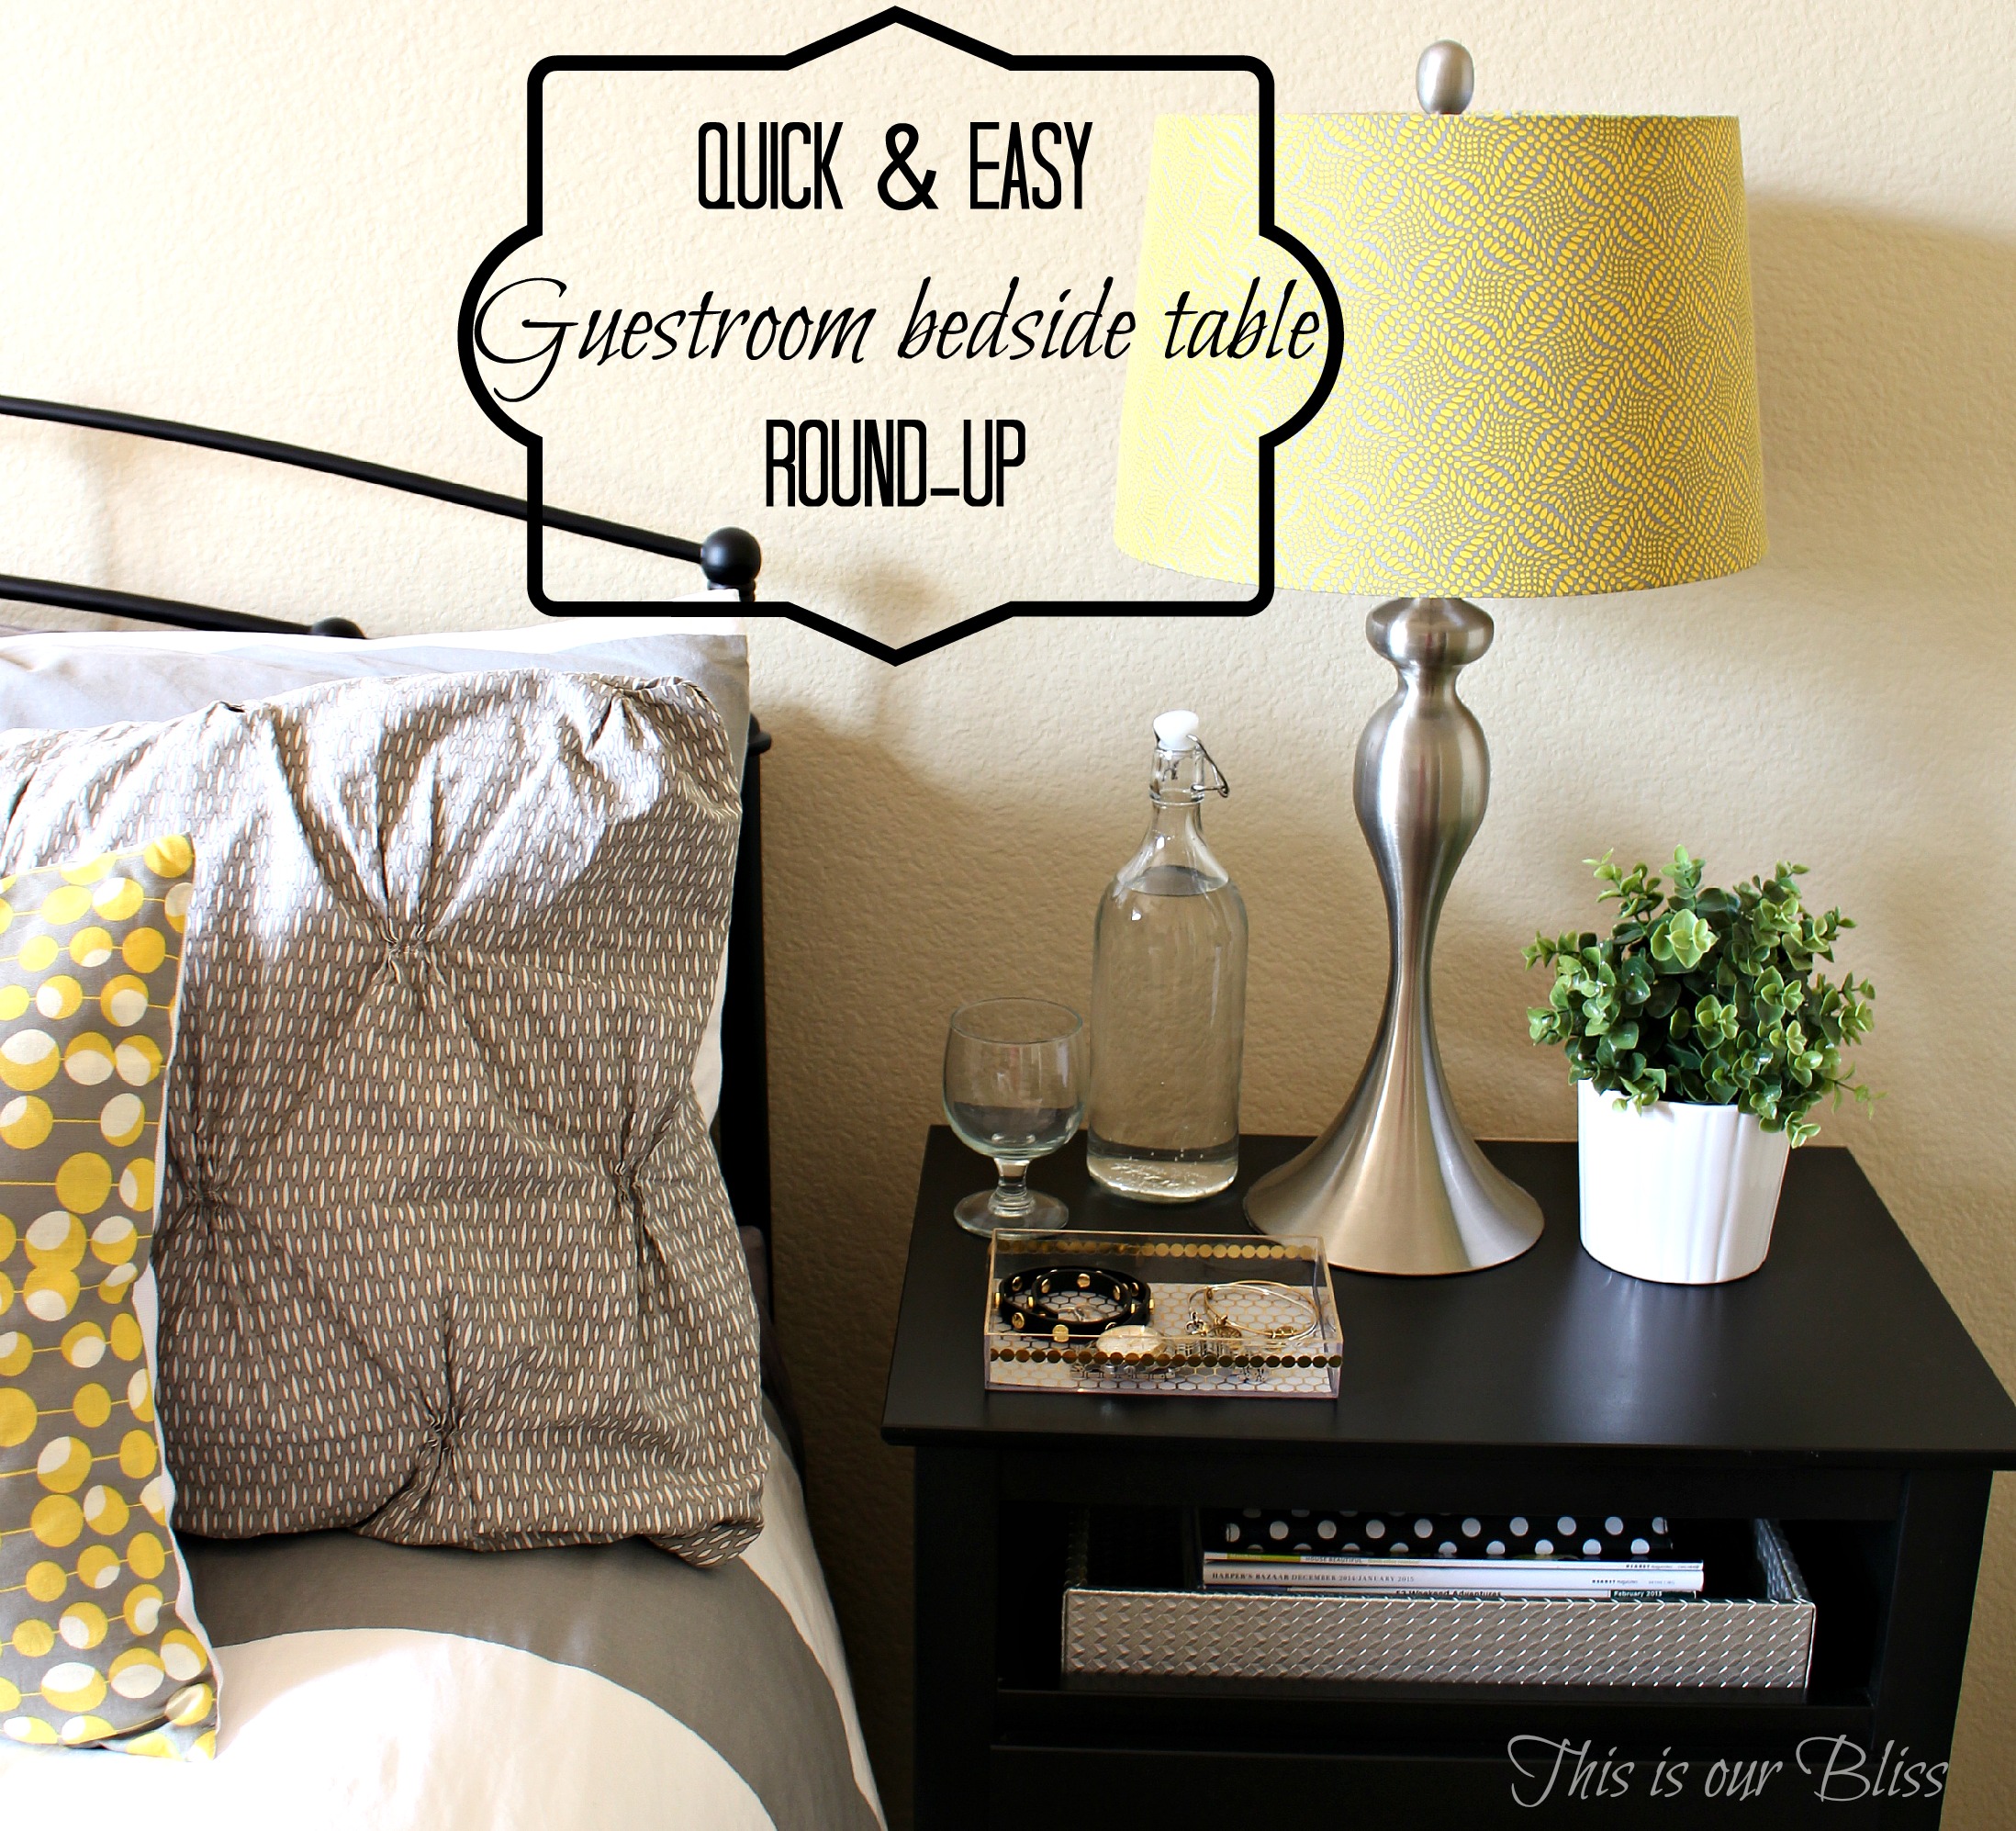 quick and easy guestroom bedside table round-up + DIY gold acrylic tray -This is our Bliss